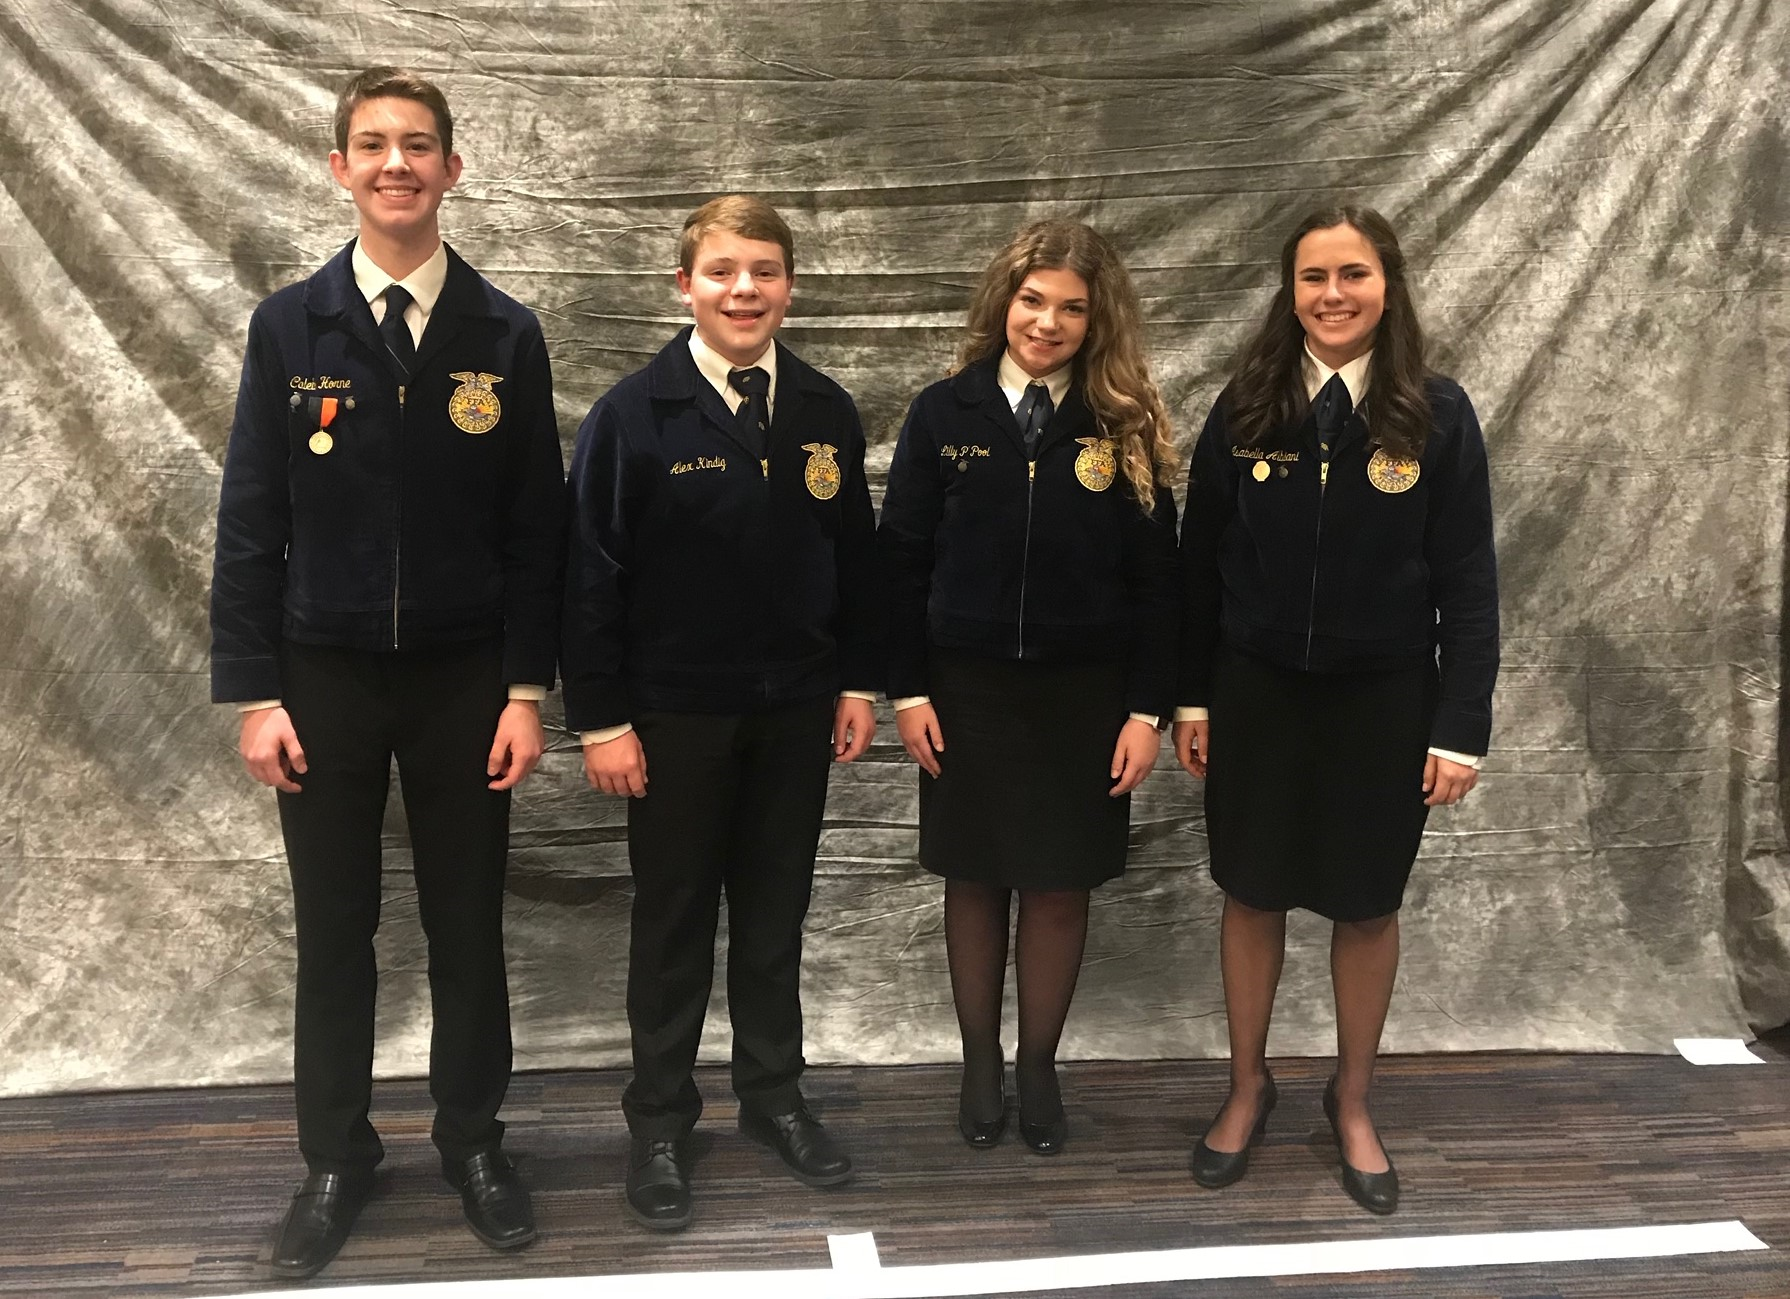 Caleb Horne of Morrison FFA Reaches National Final Four in the Creed Presentation